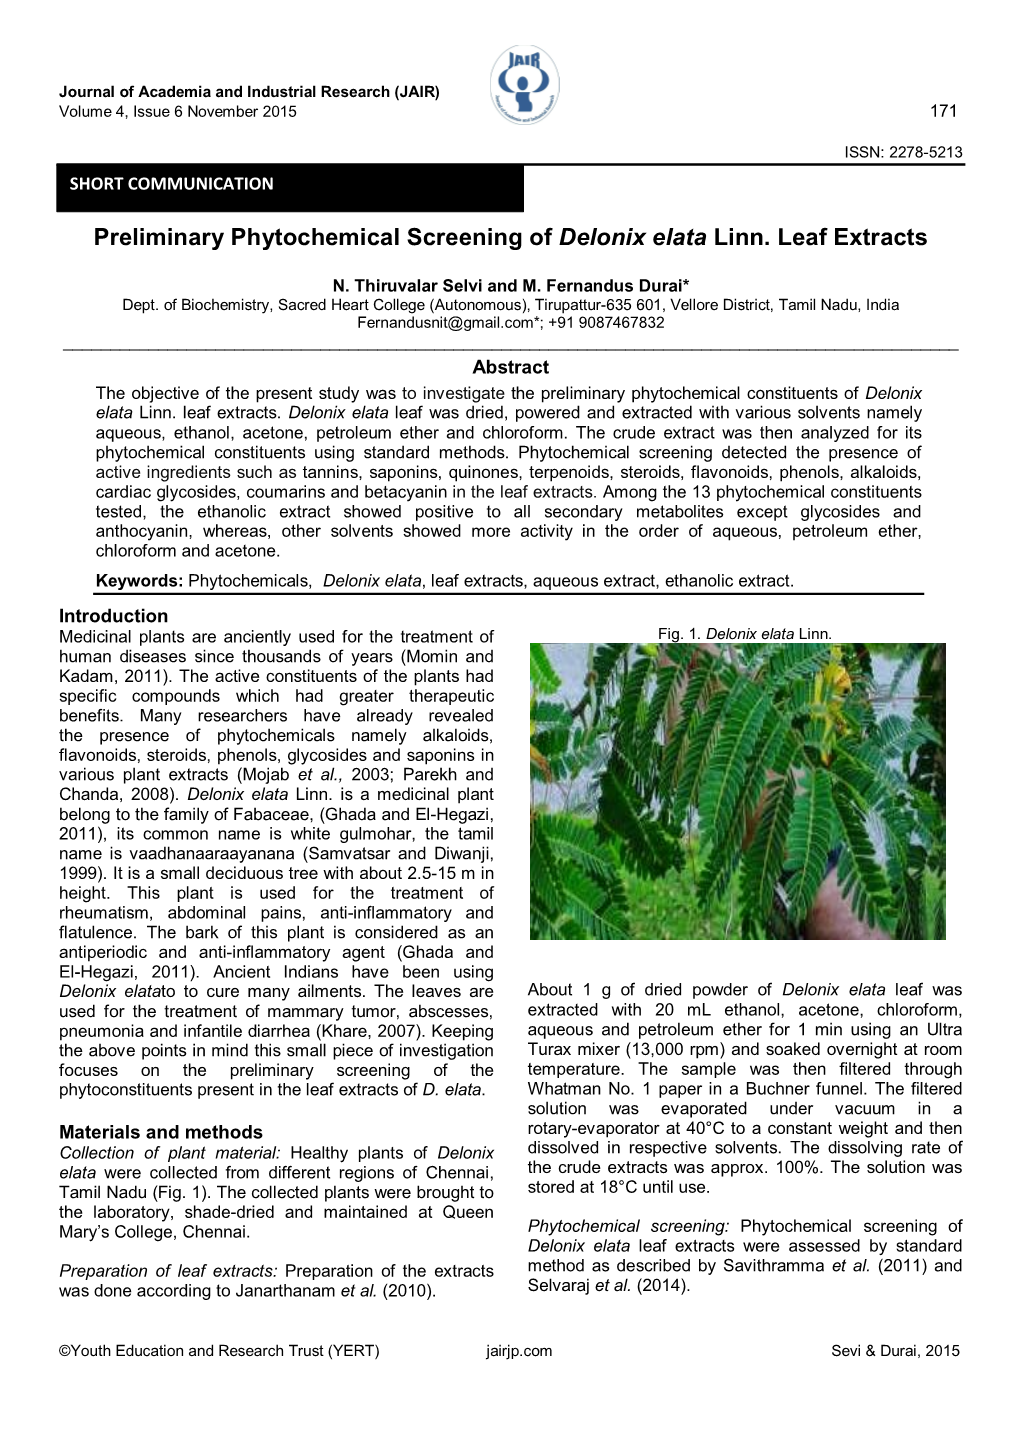 Preliminary Phytochemical Screening of Delonix Elata Linn. Leaf Extracts